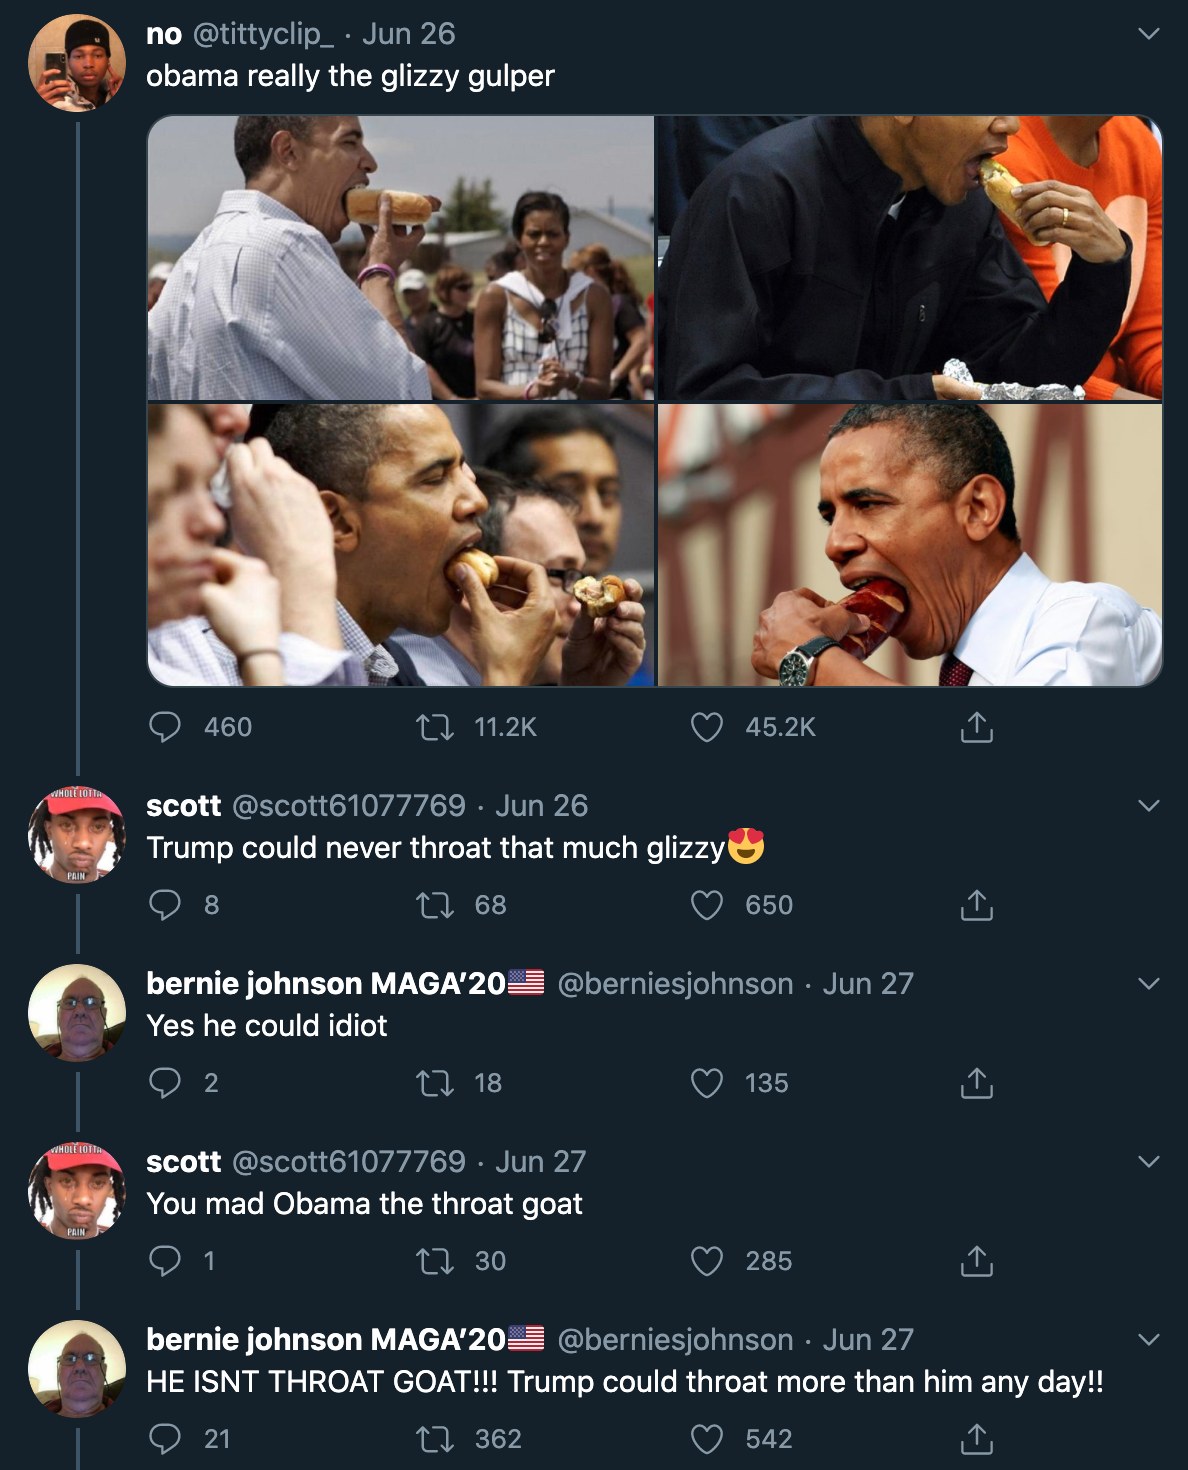 obama eating hot dog - obama really the glizzy gulper - Trump could never throat that much glizzy - Yes he could idiot - You mad Obama the throat goat - he isnt throat goat! trump could throat more than him any day!